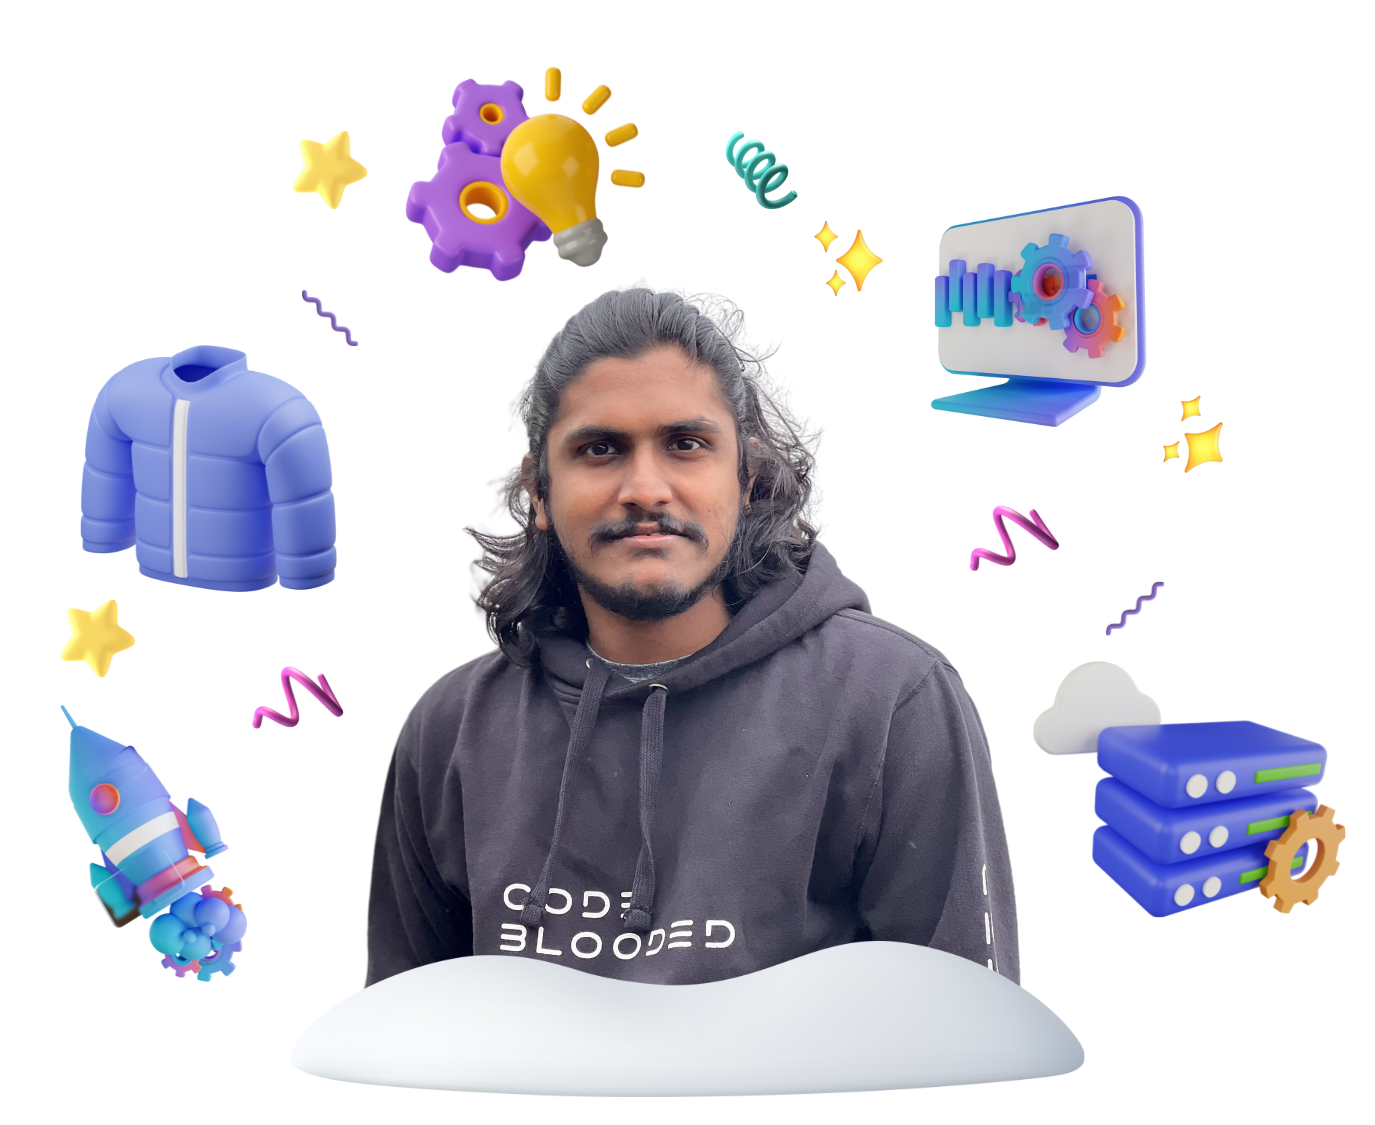 Picture of Melvin george in a cloud with illustrations of laptop, hoodie, gear with light bulb, rocket and server around